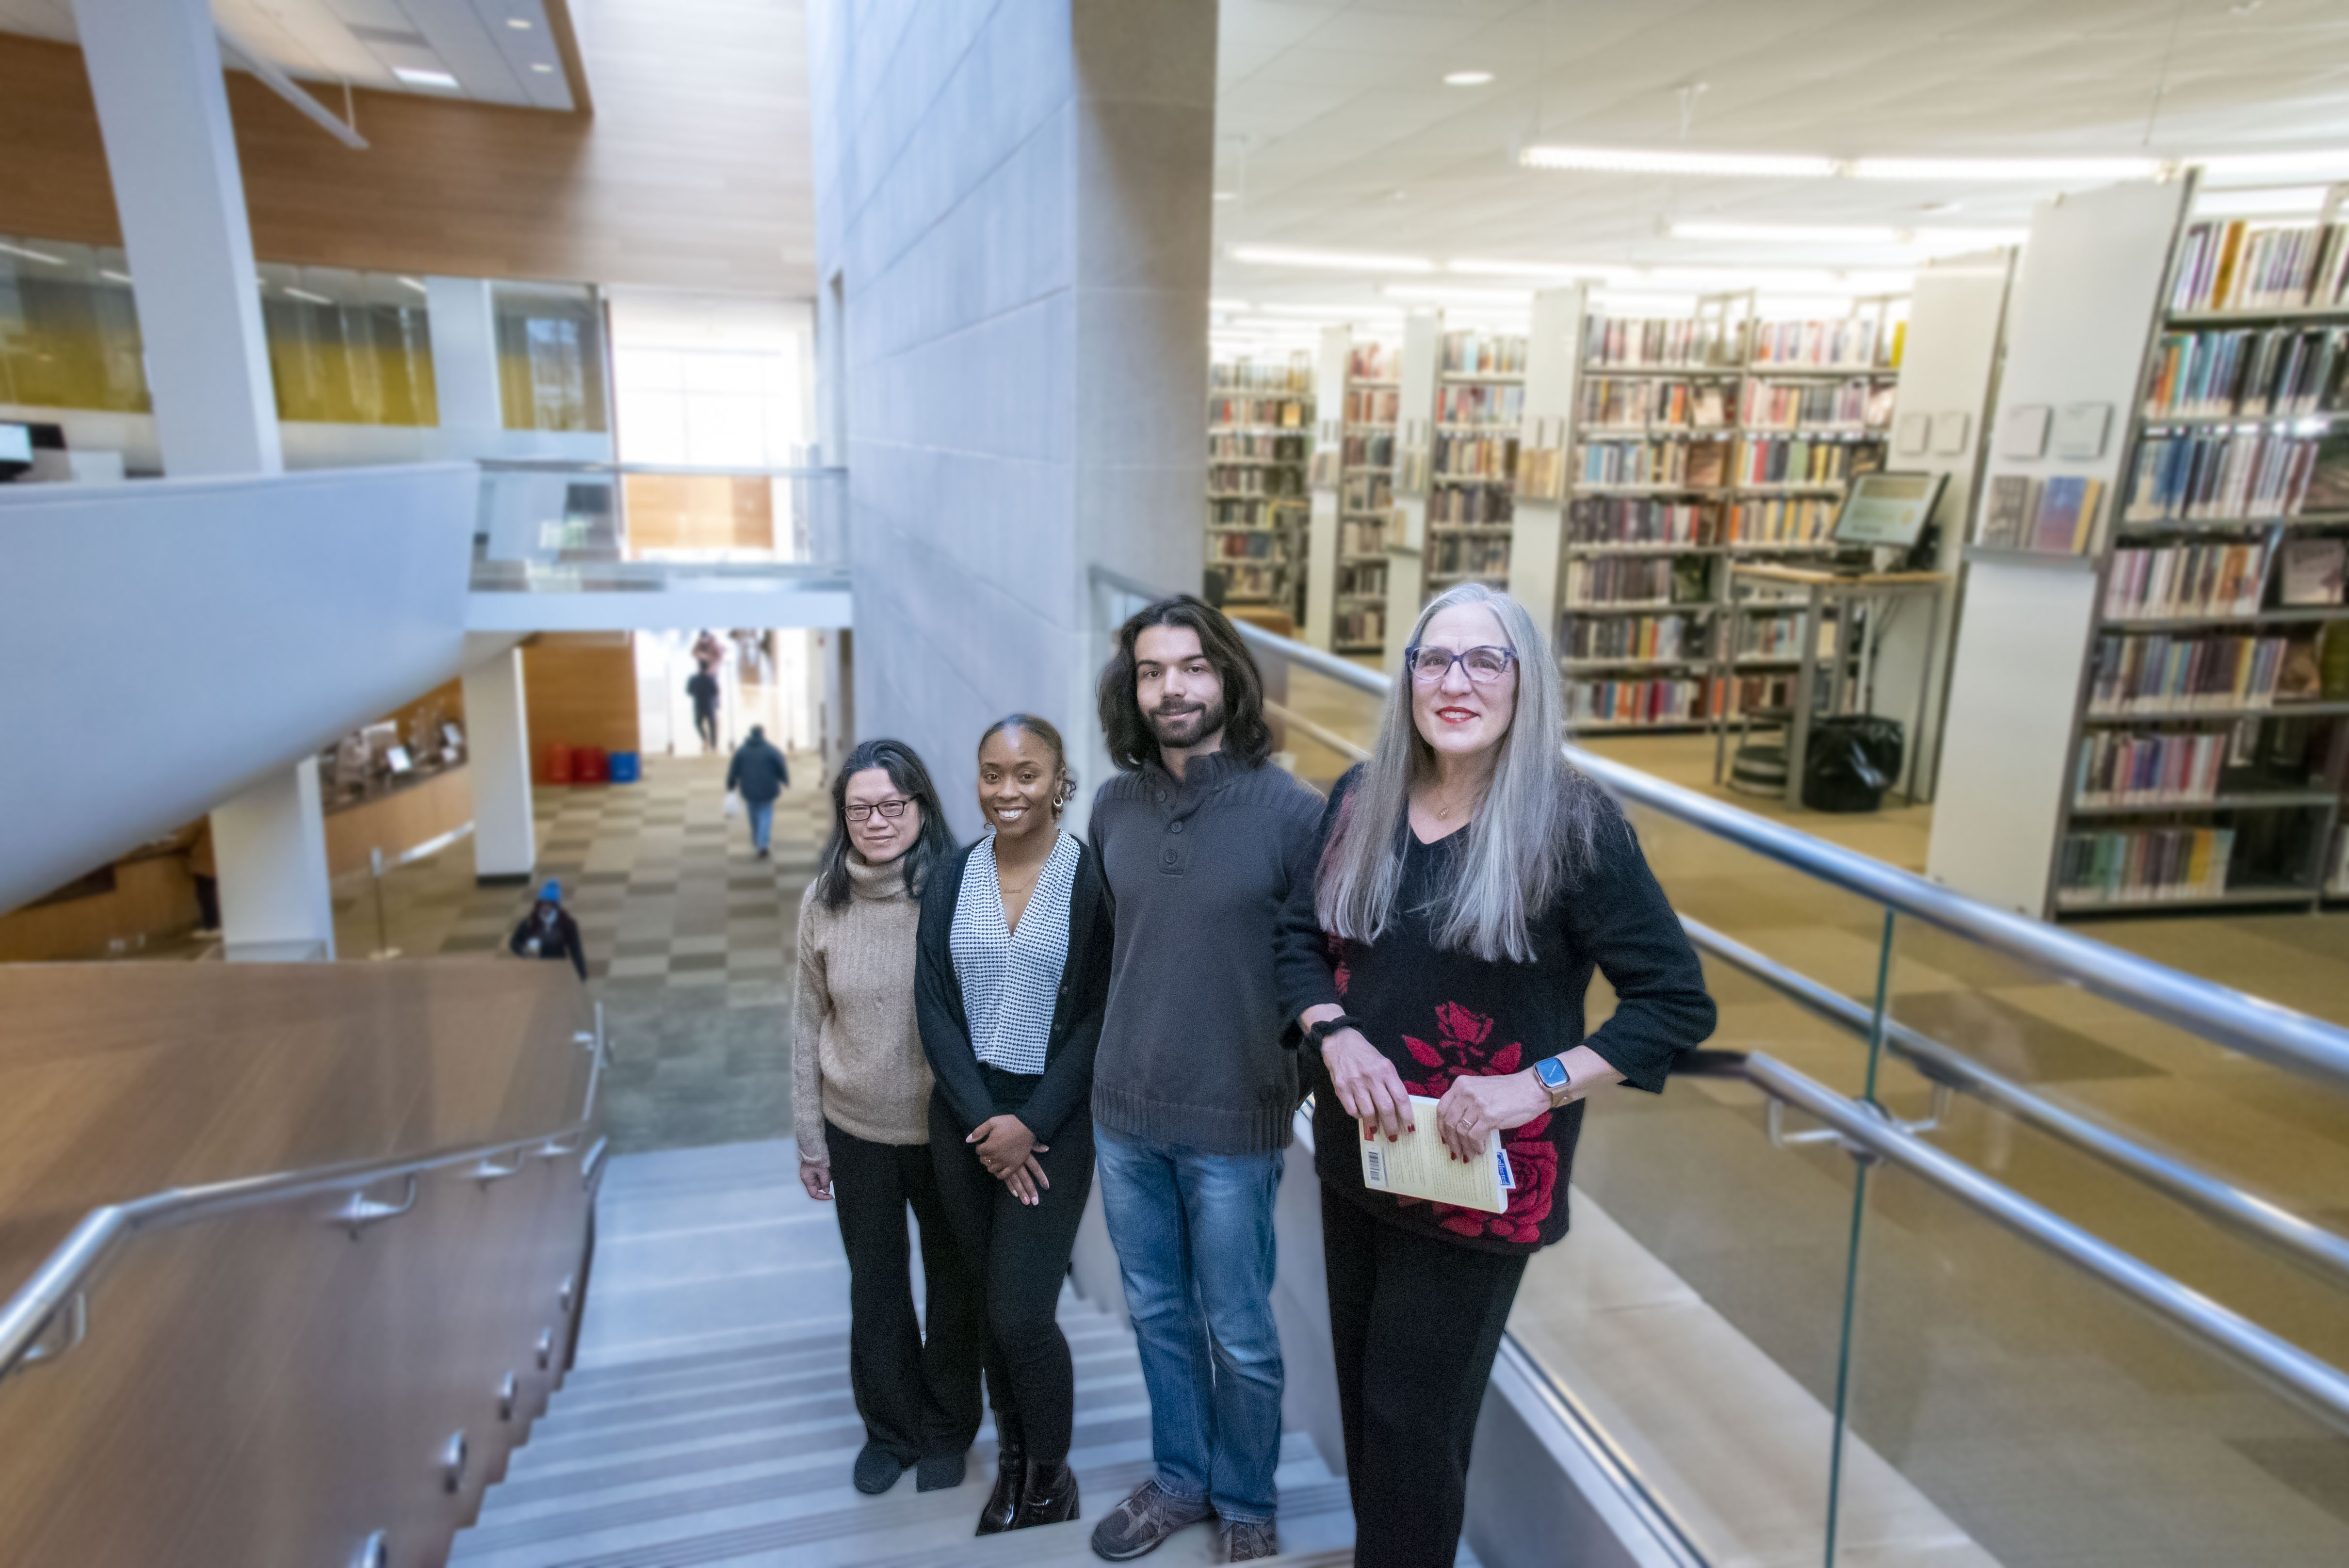 Researchers Liz Stine-Morrow, Giavanna McCall, Ilber Manavbasi, and Shuk Han Ng stand on the stairs of the Champaign Public Library.